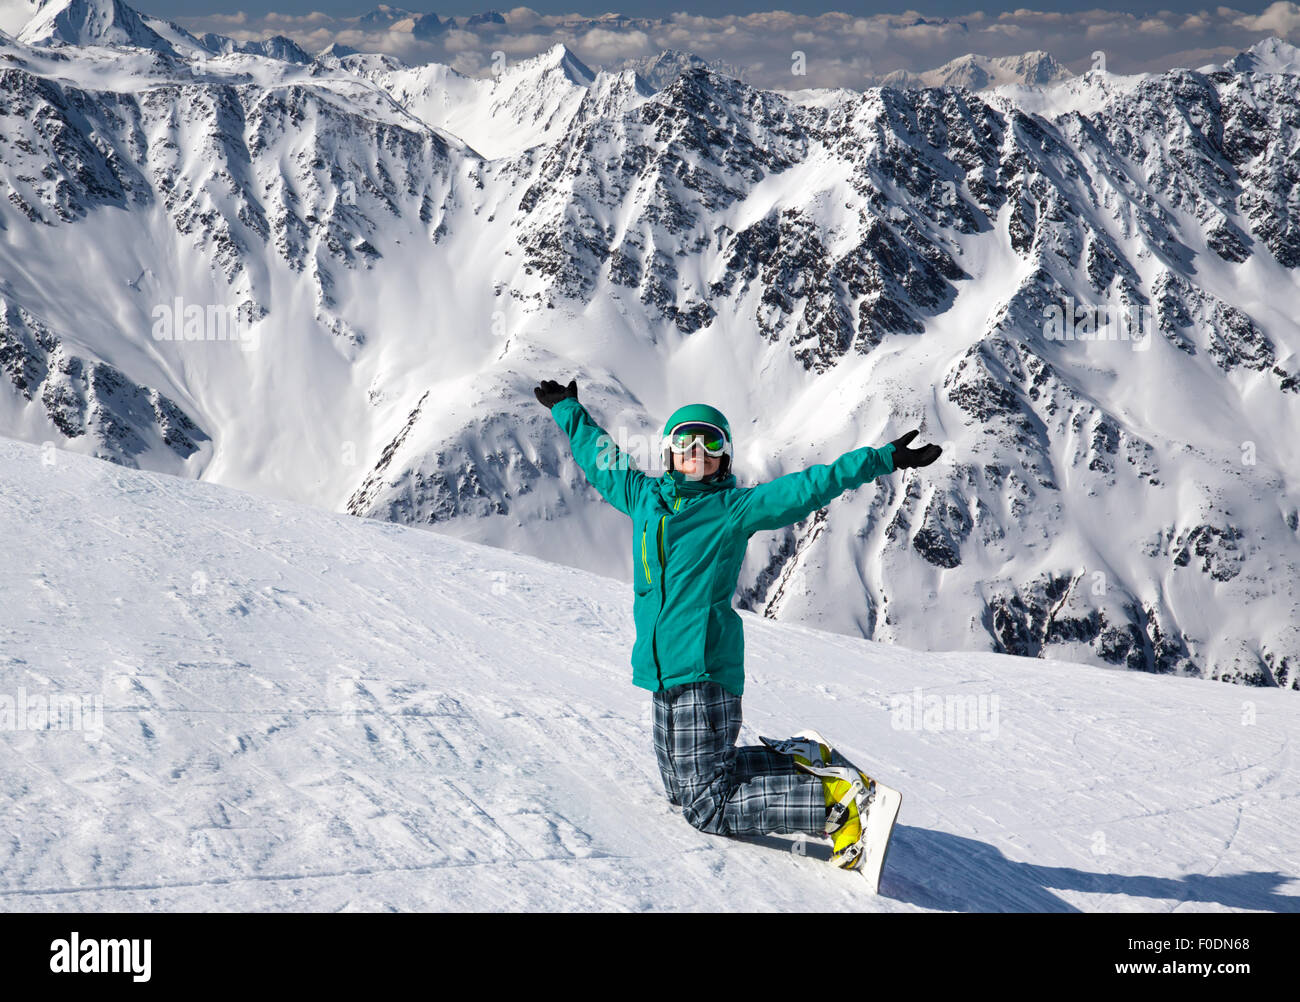 snowboarder at snow hill in Solden, Austria, extreme winter sport Stock Photo